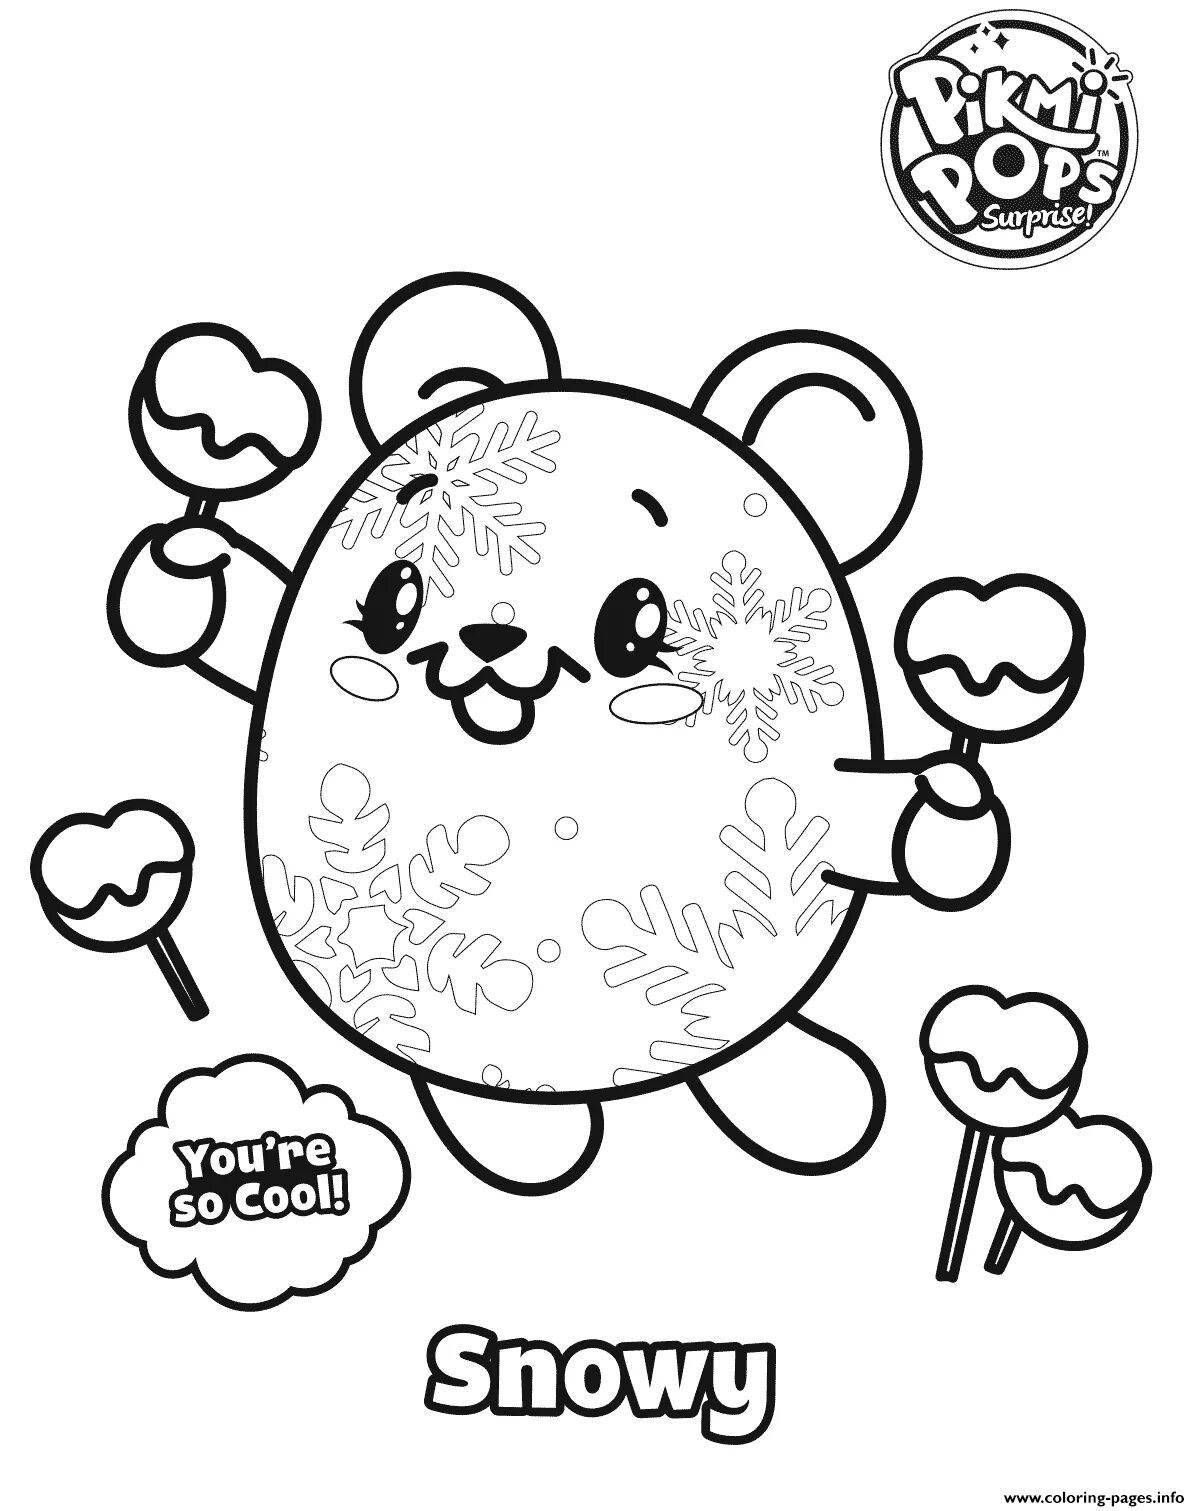 Colorful playful pikmy pops coloring page